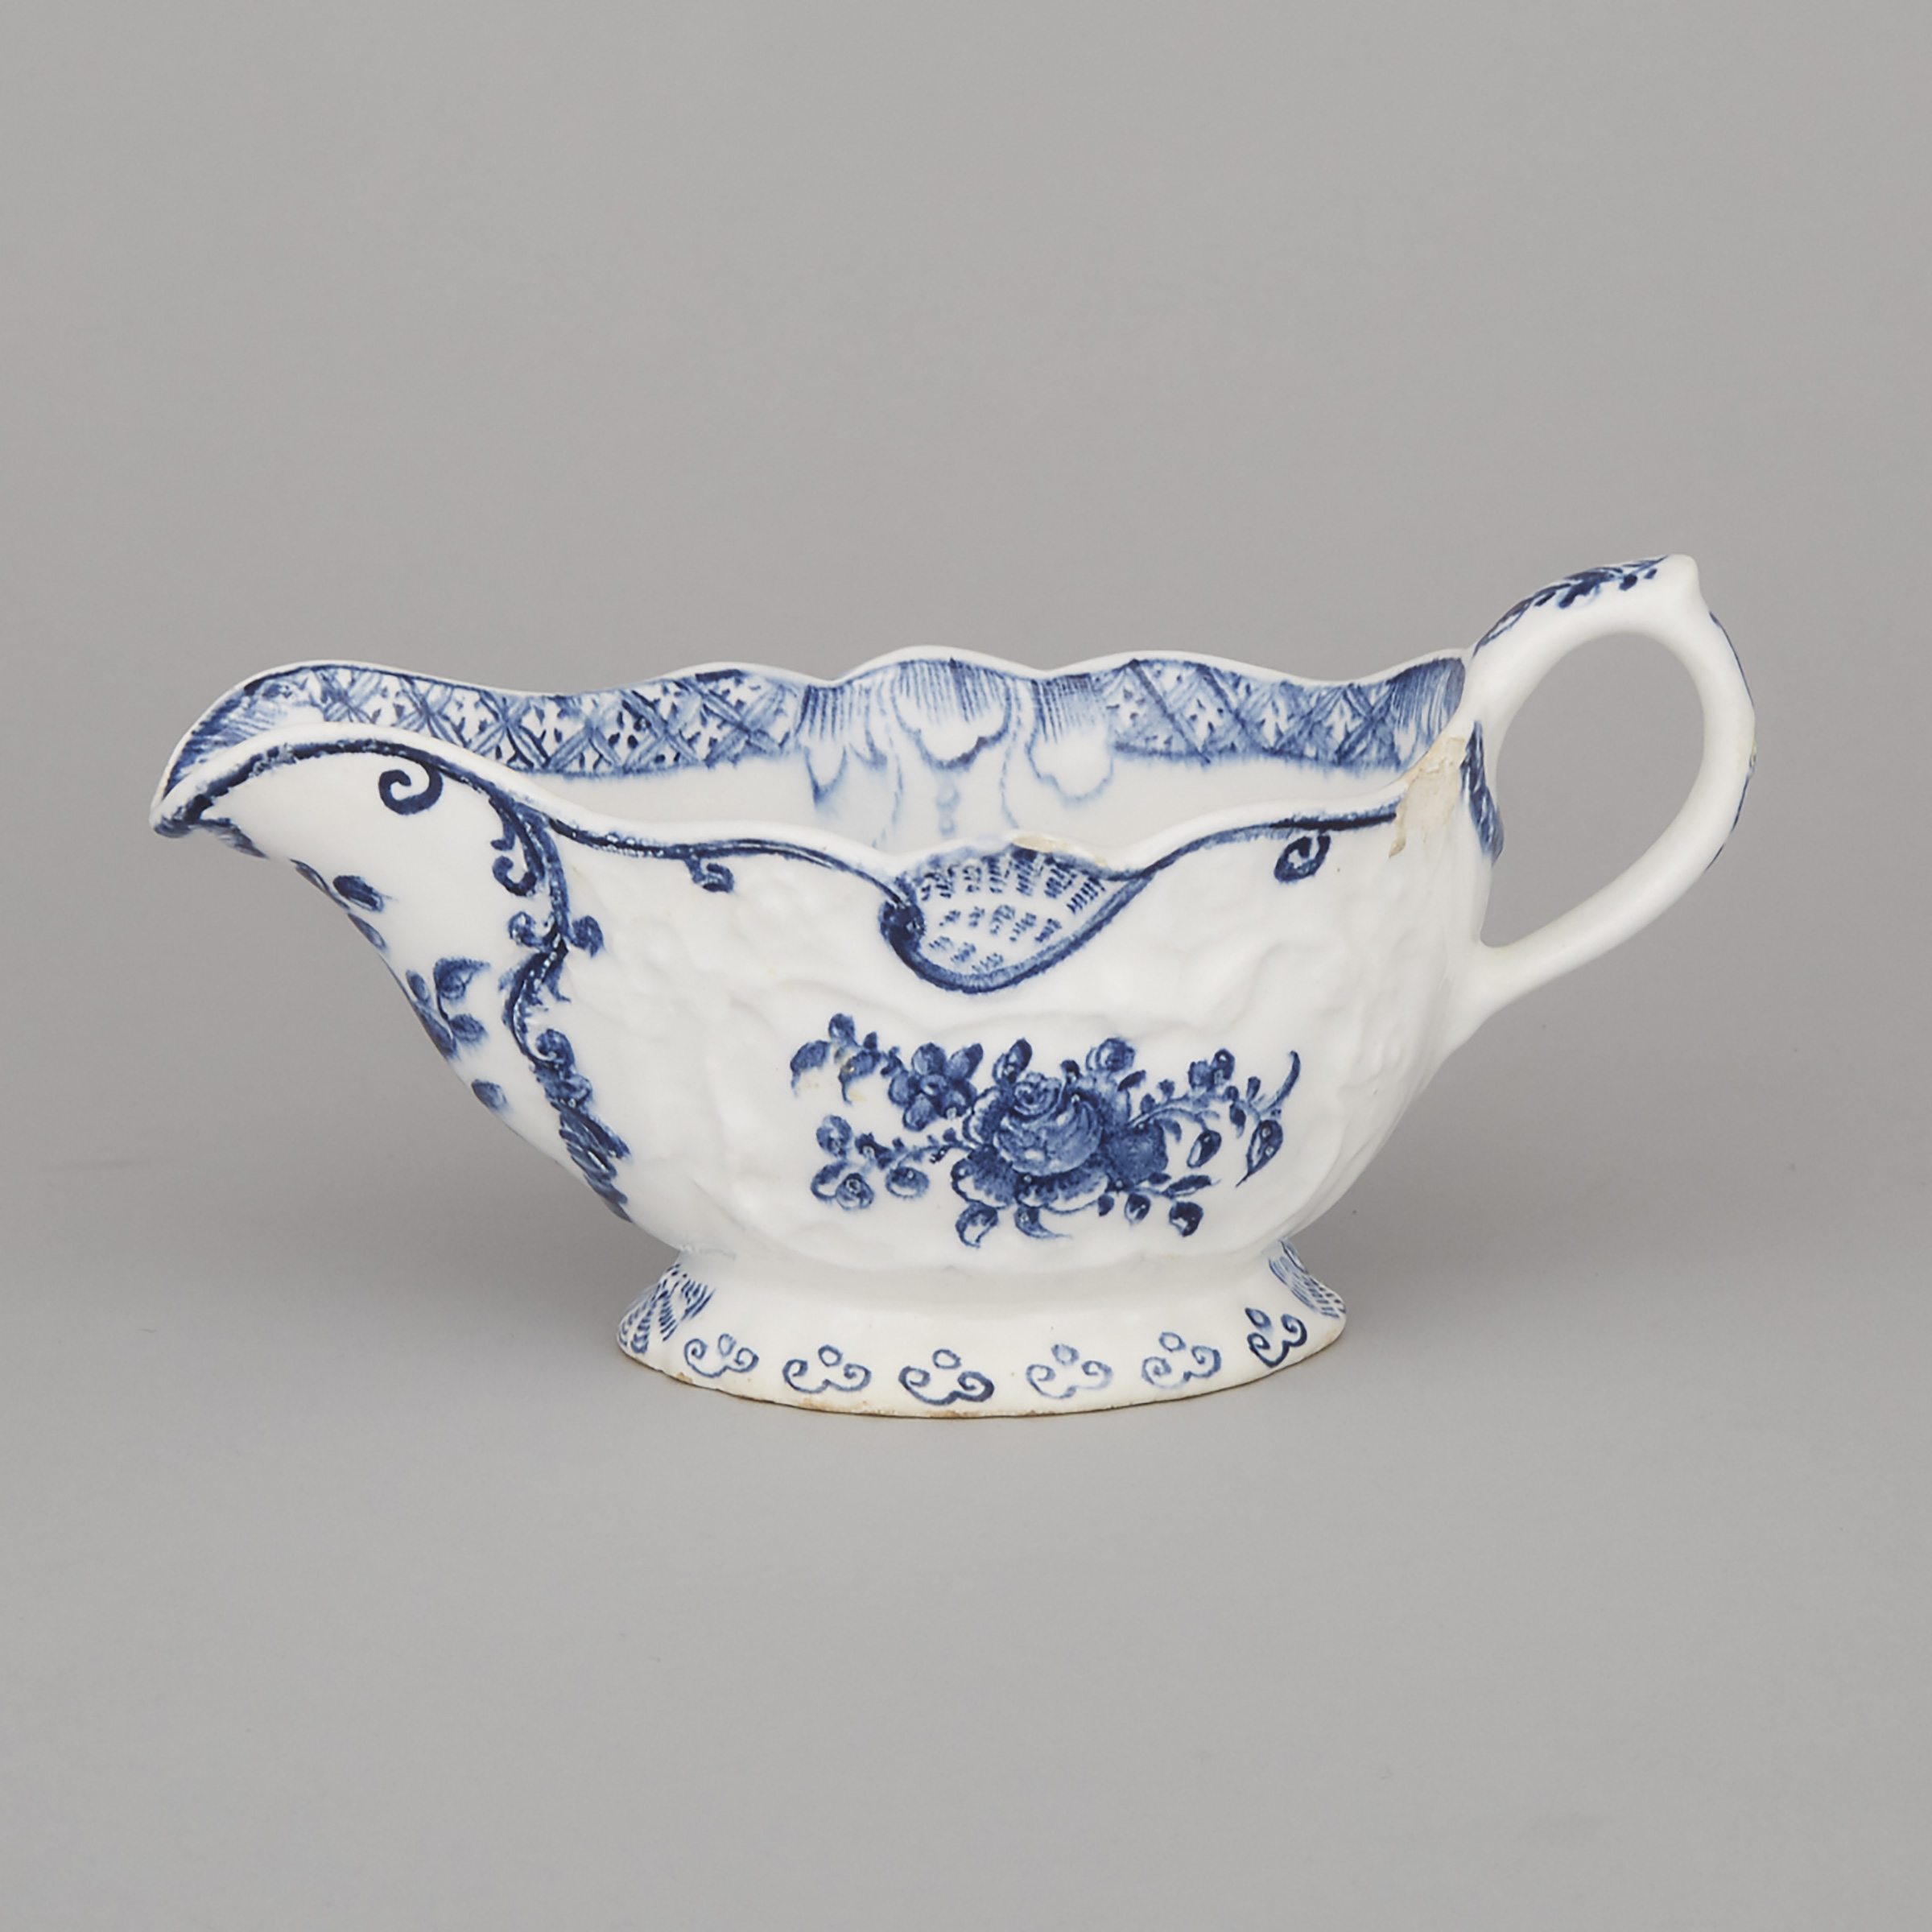 Bow Blue and White Moulded Sauce Boat, c.1770